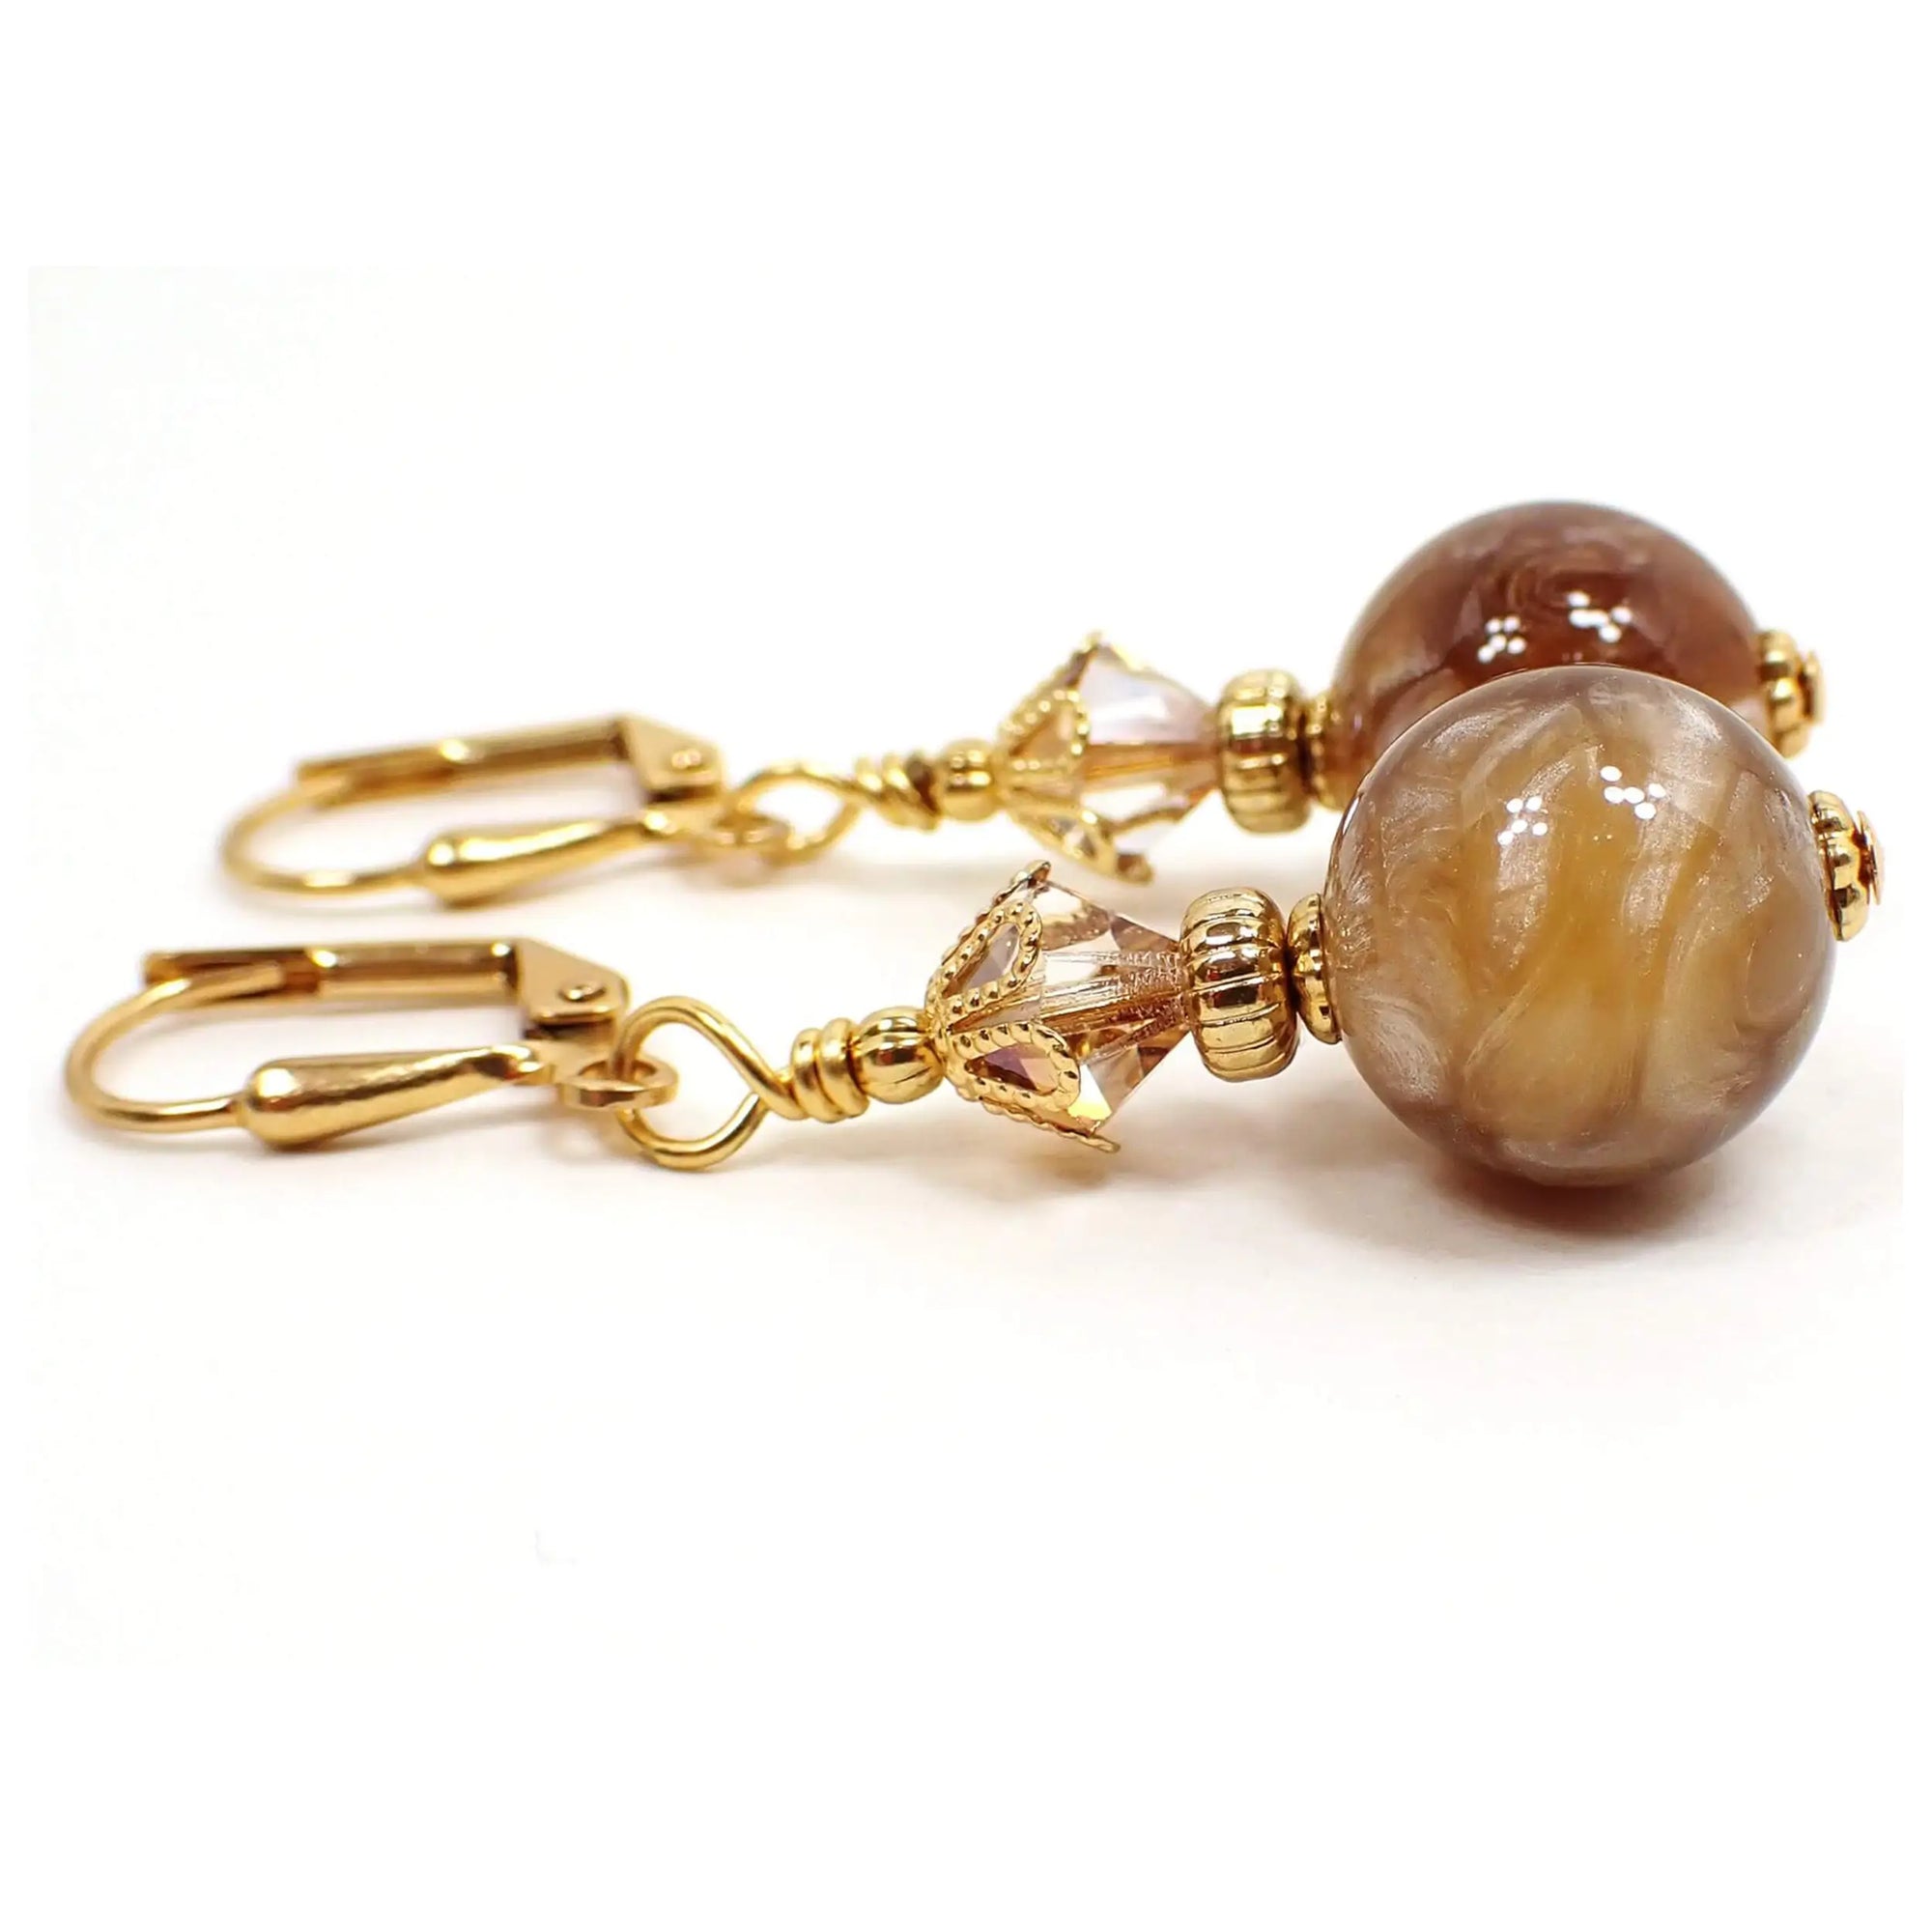 Side view of the handmade drop earrings vintage vintage lucite beads. The metal is gold plated in color. There are faceted glass crystal beads at the top if a light brown color with hints of orange. The bottom lucite beads are round and have pearly marbled swirls of brown and peach tones.